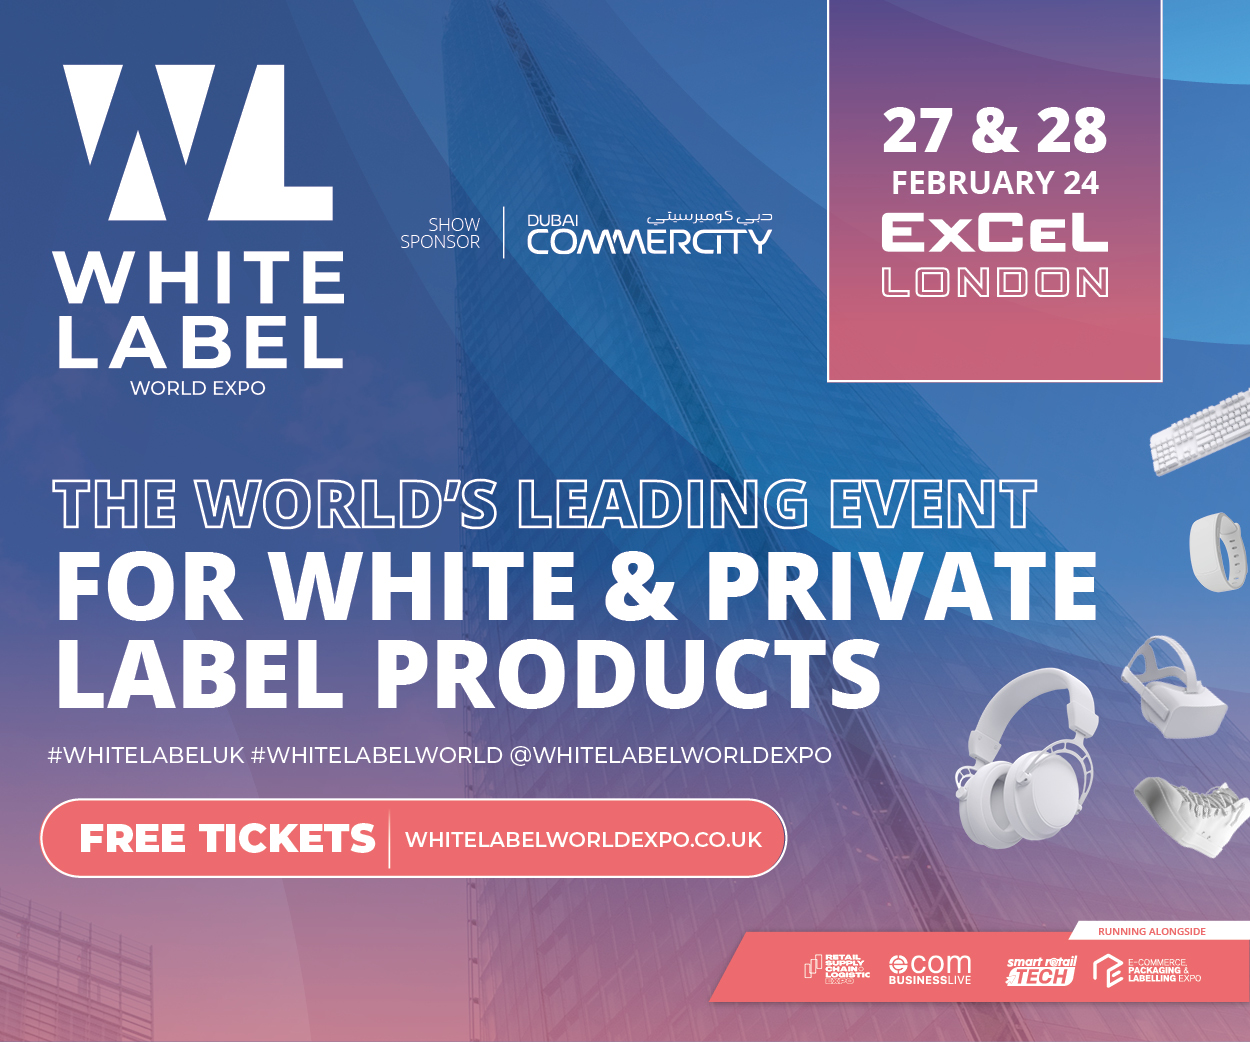 Partnering With White Label World Expo London!